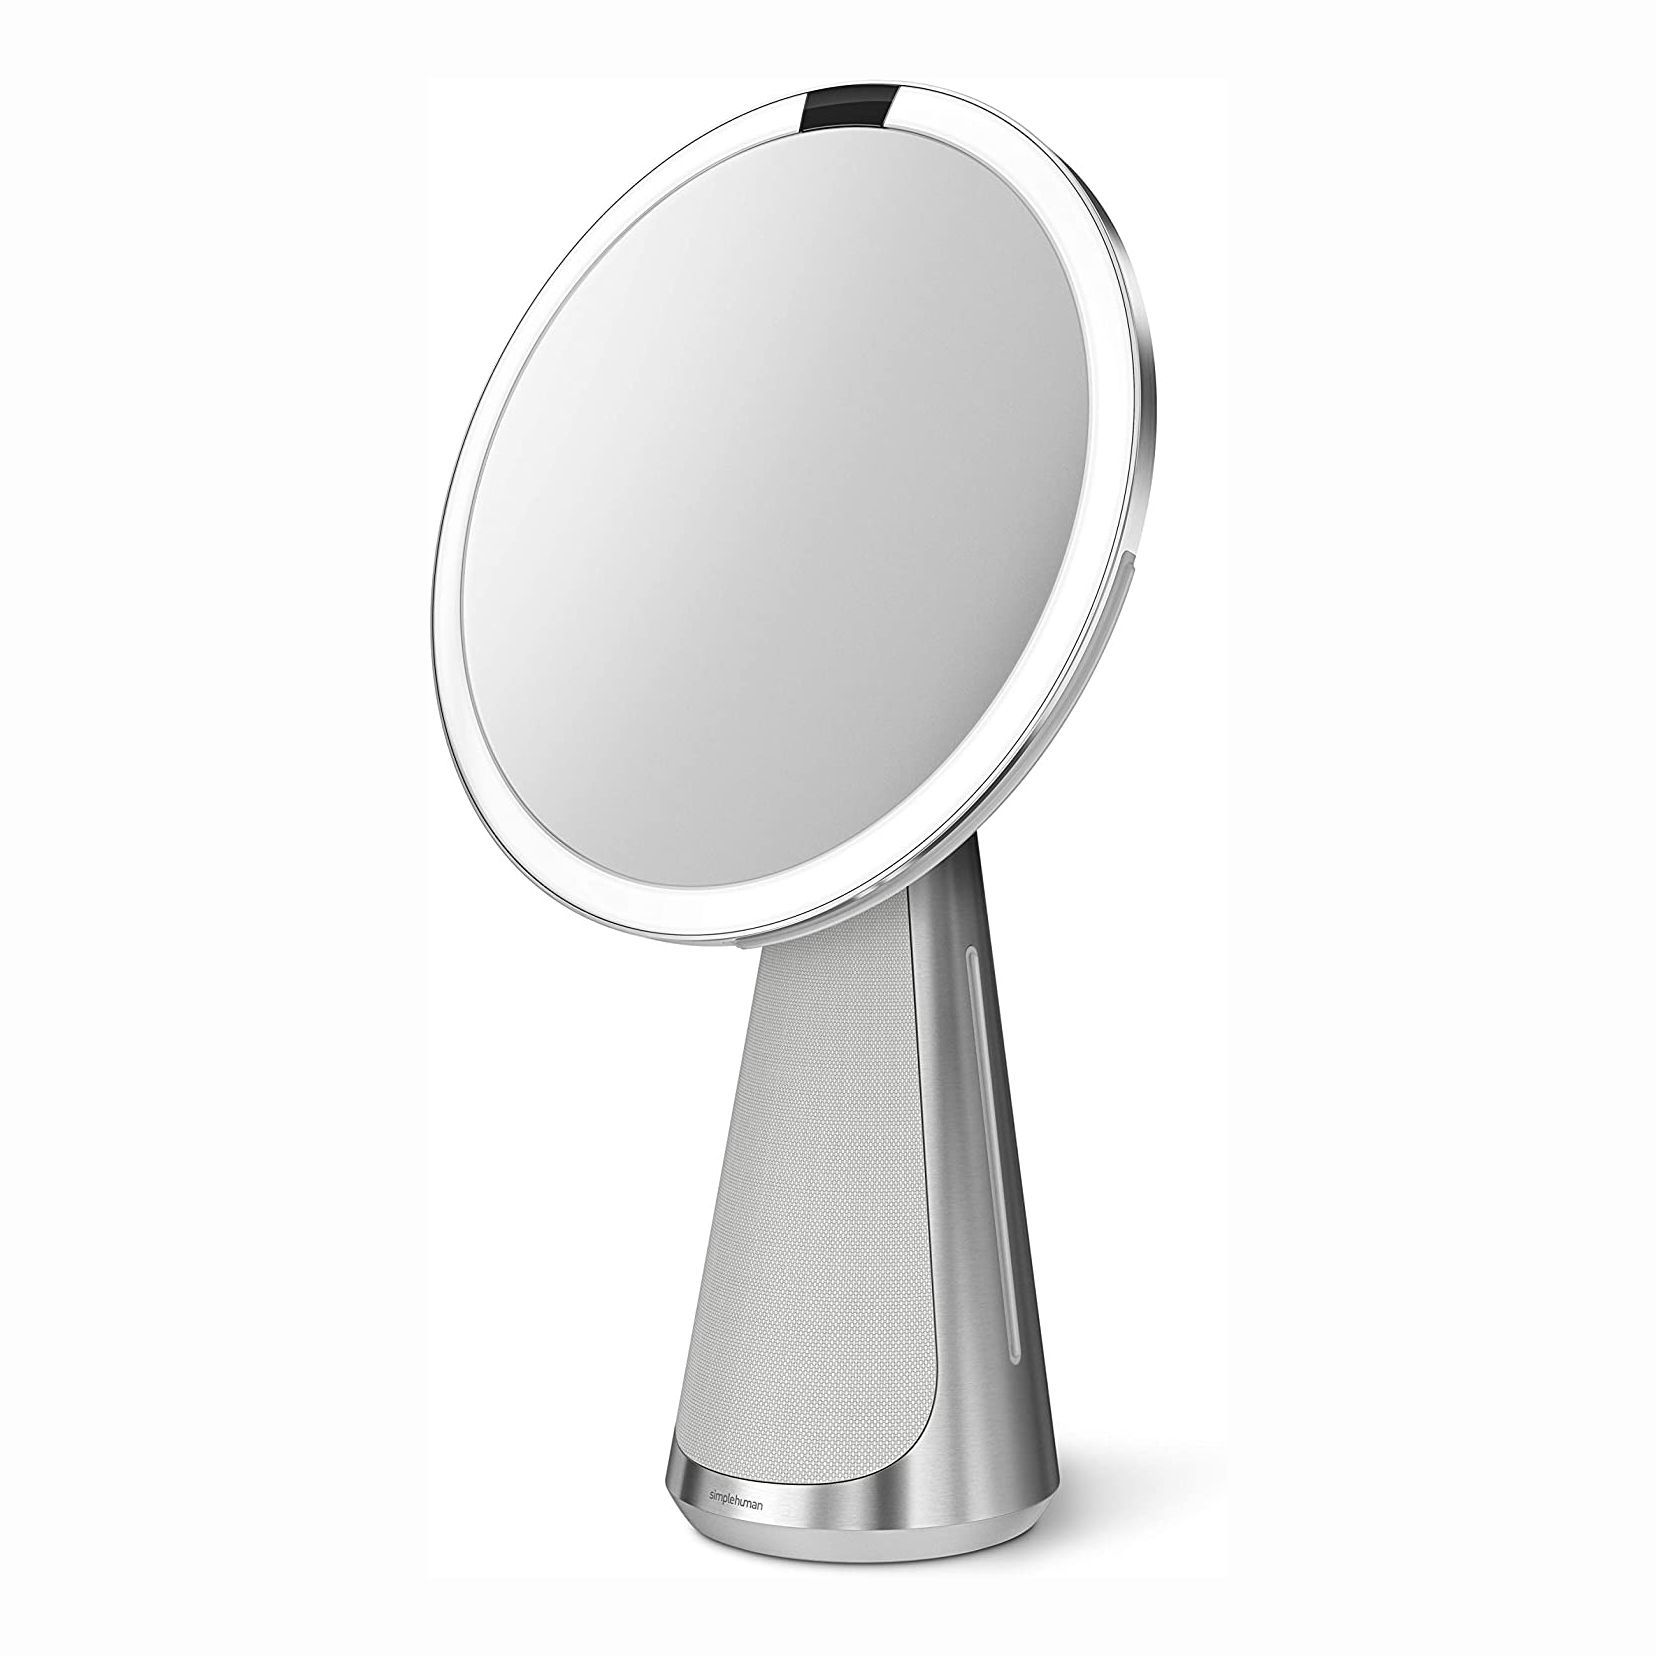 Brmeday Makeup Mirror with Light for Women Light Up Mirror Touch Screen Portable Travel Beauty Mirrors 3 Lighting Color Modes Vanity Mirror,5X Magnifying Mirror with Light 